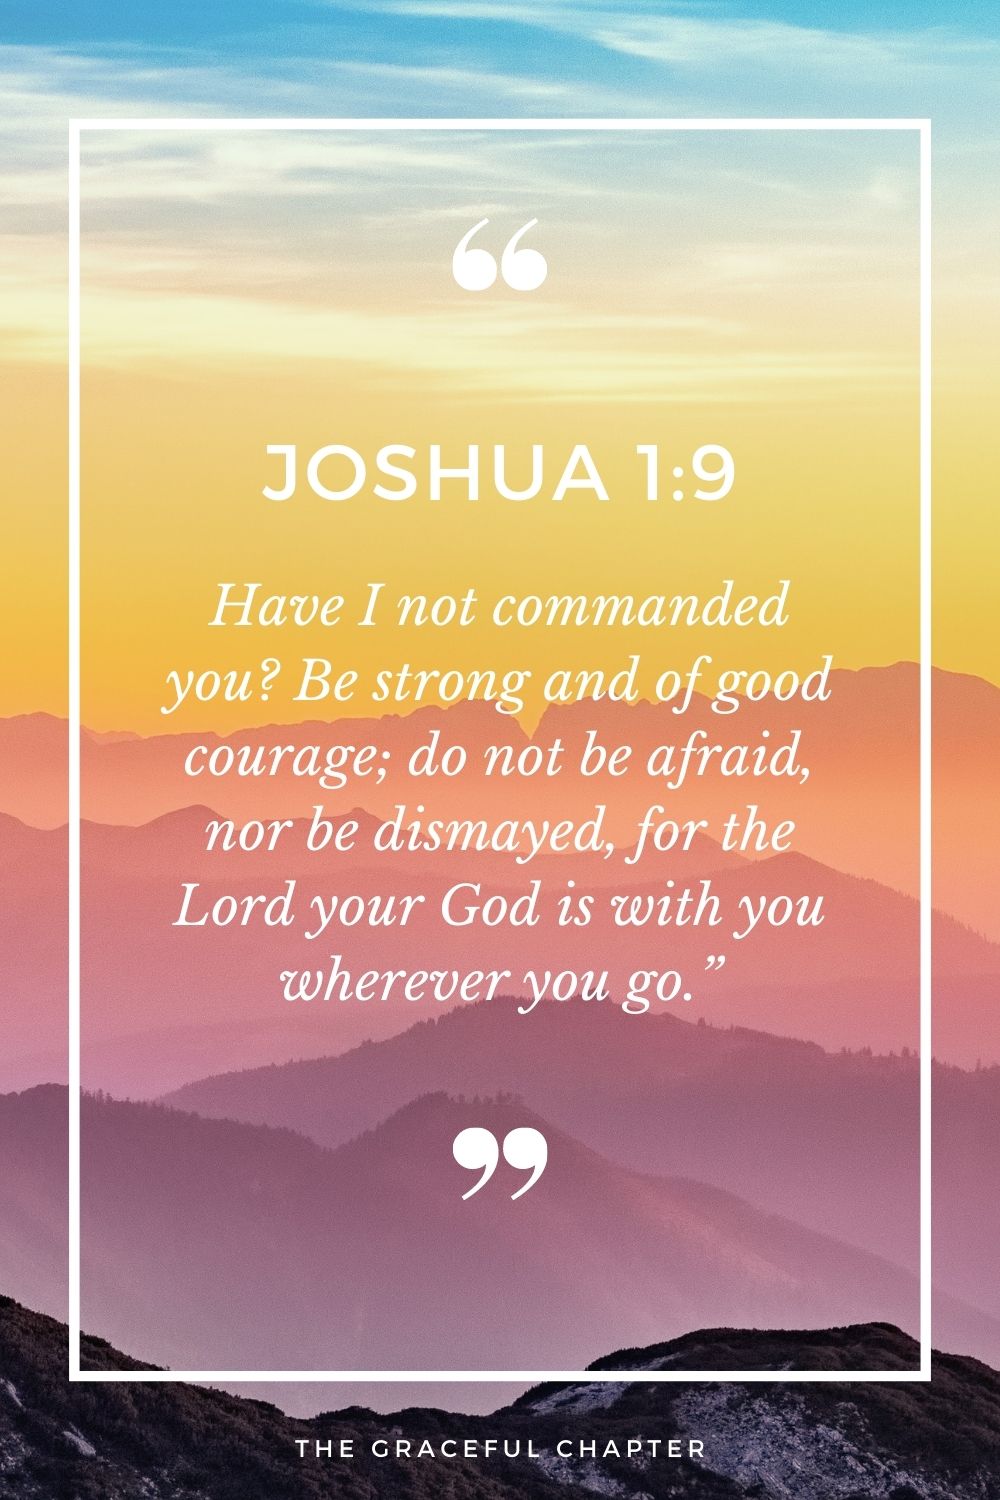 Have I not commanded you? Be strong and of good courage; do not be afraid, nor be dismayed, for the Lord your God is with you wherever you go.” Joshua 1:9